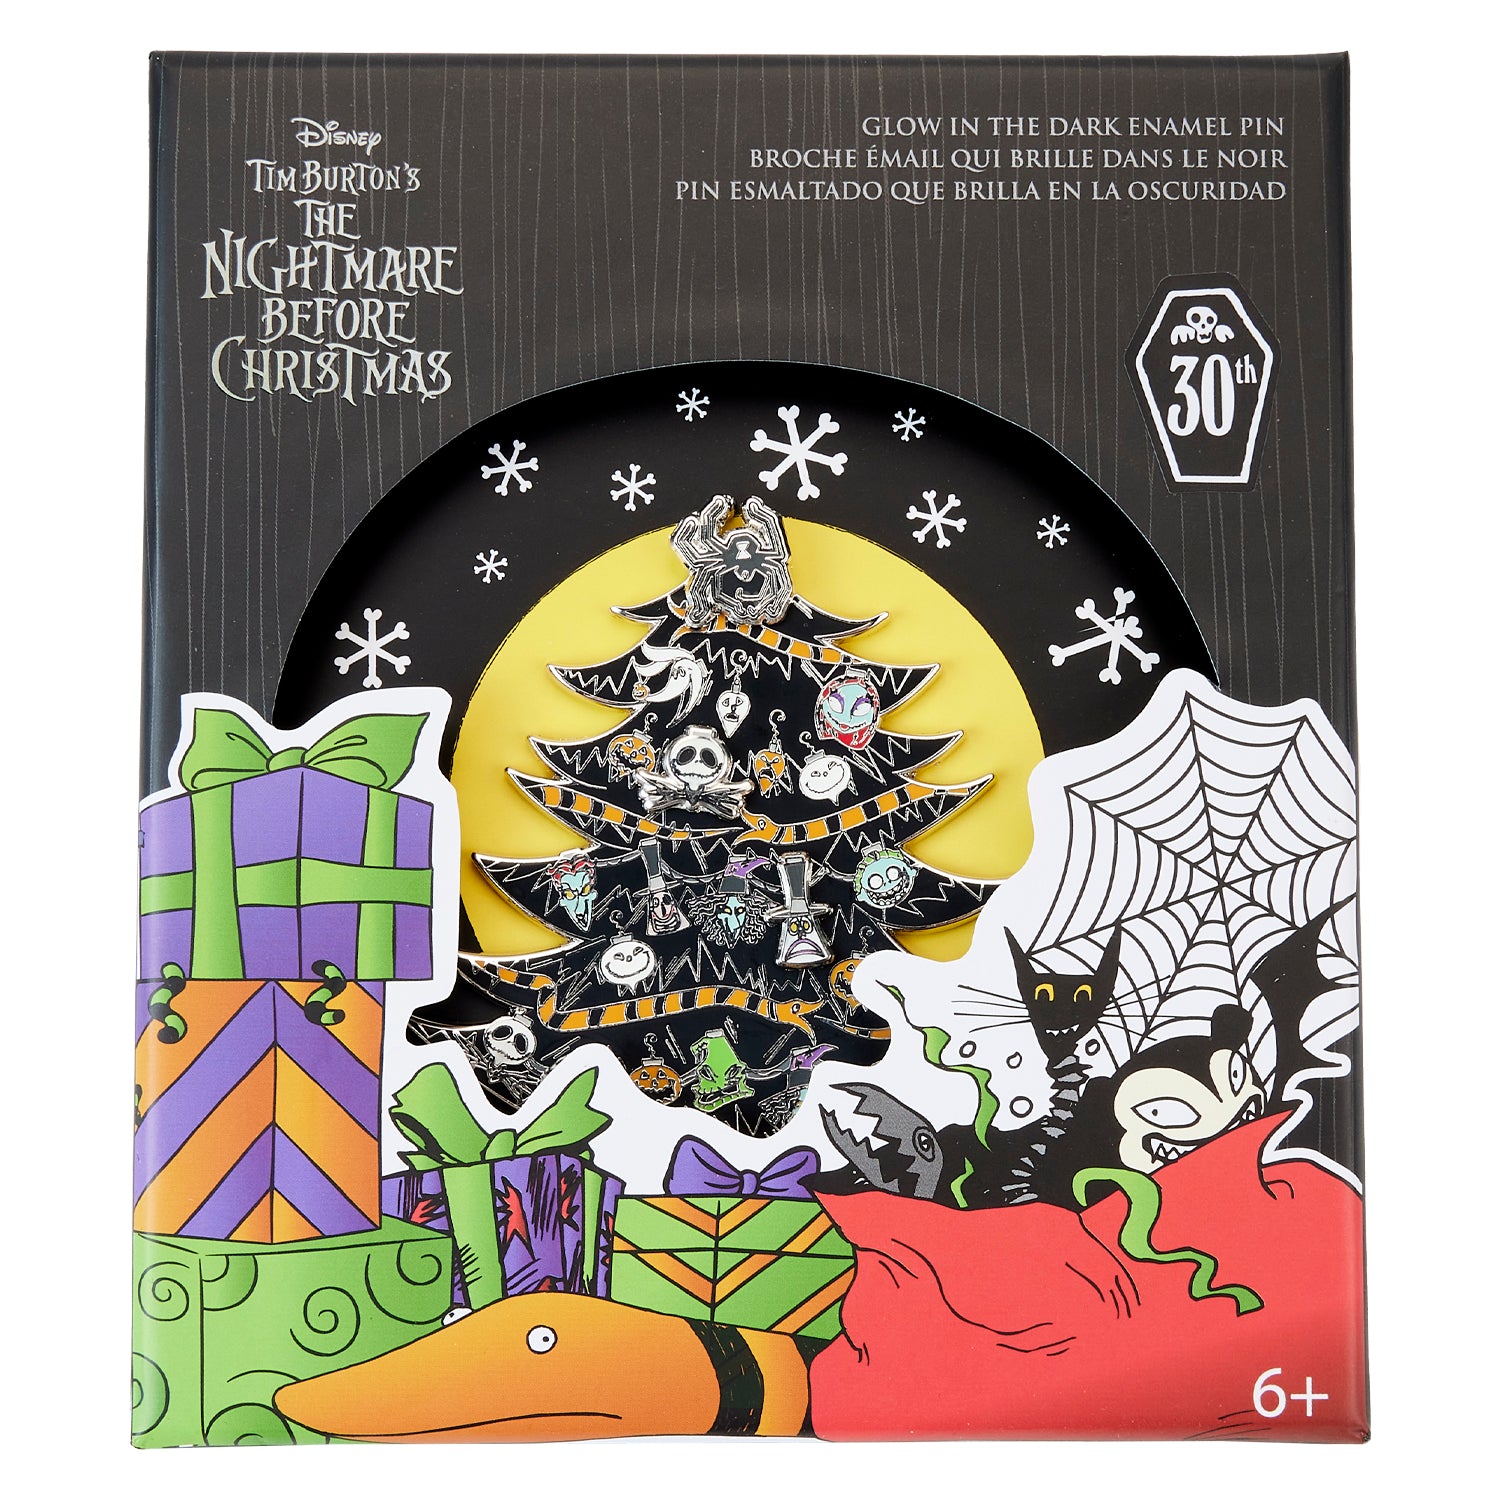 Loungefly Disney Nightmare Before Christmas GITD Christmas Tree 3" Limited Edition Collector Box Pin